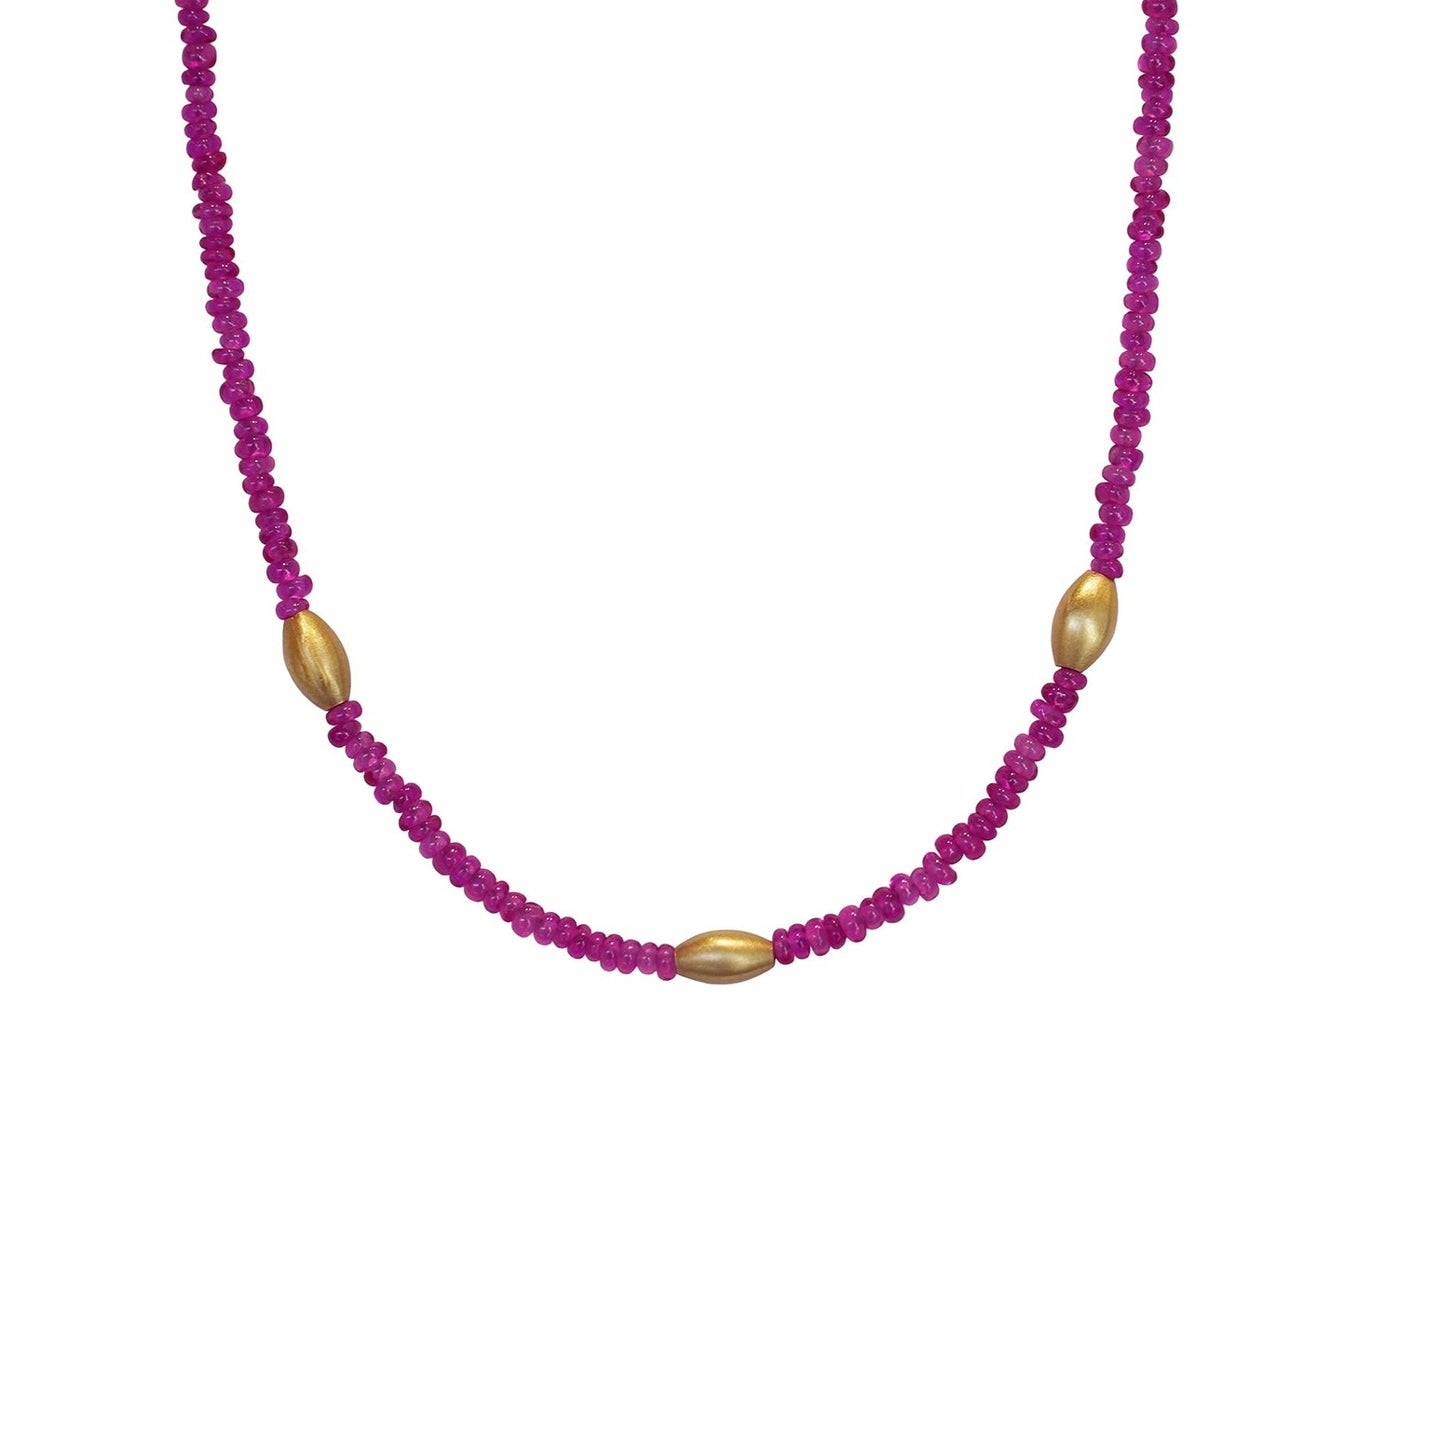 Ruby Rondelle Beaded Necklace